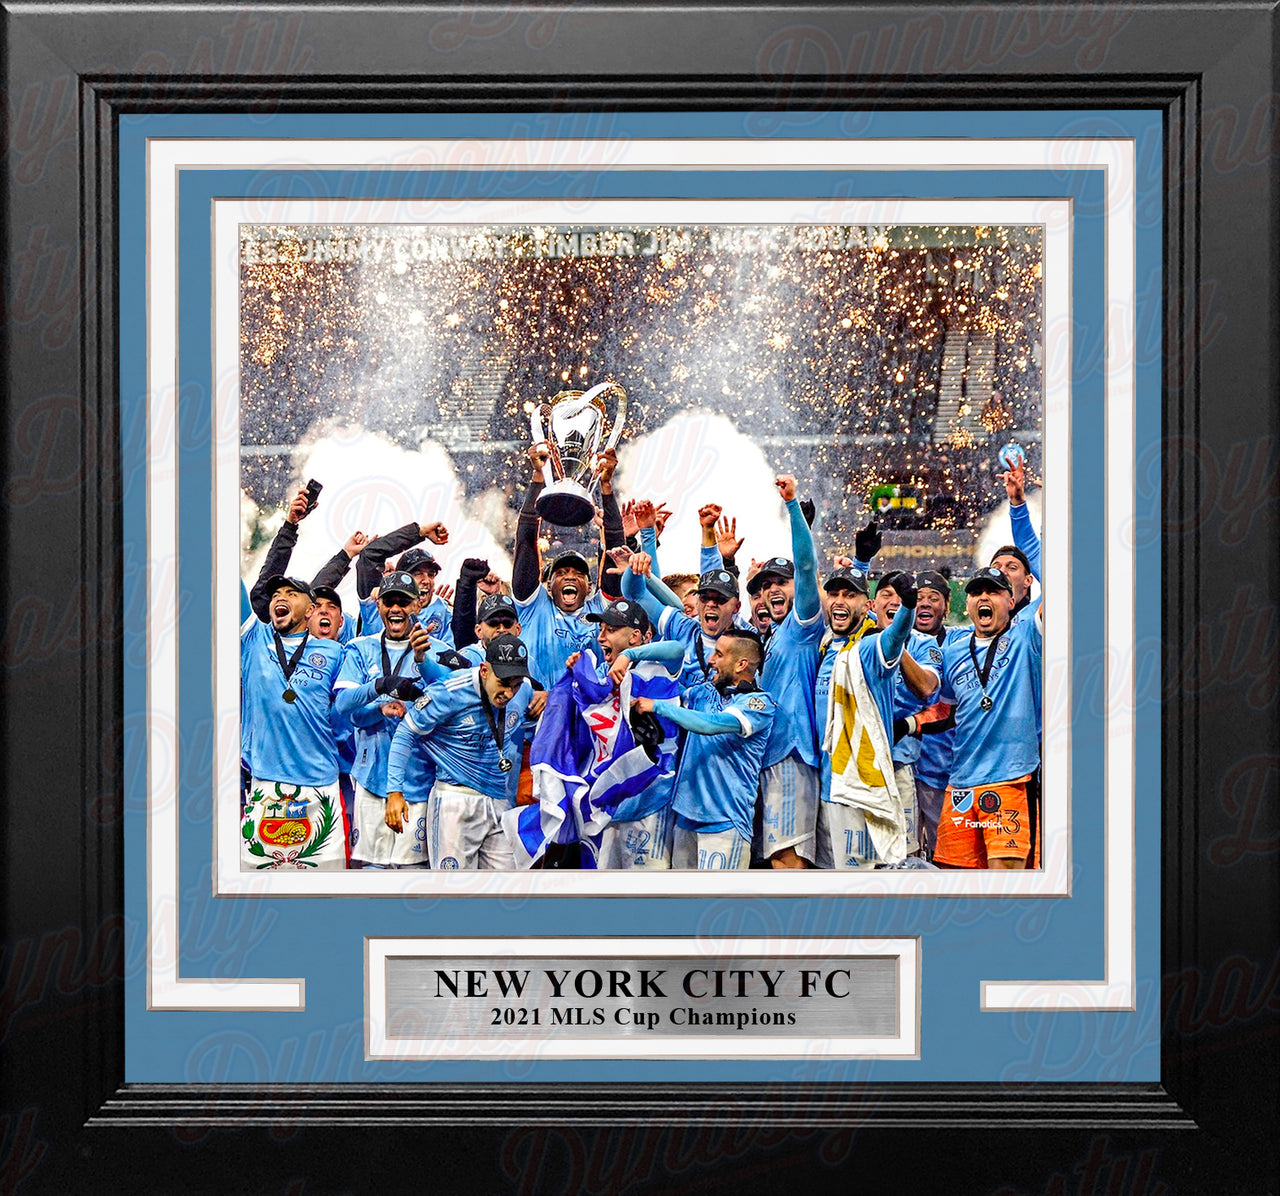 New York City FC 2021 MLS Cup Champions 8" x 10" Framed Soccer Photo - Dynasty Sports & Framing 